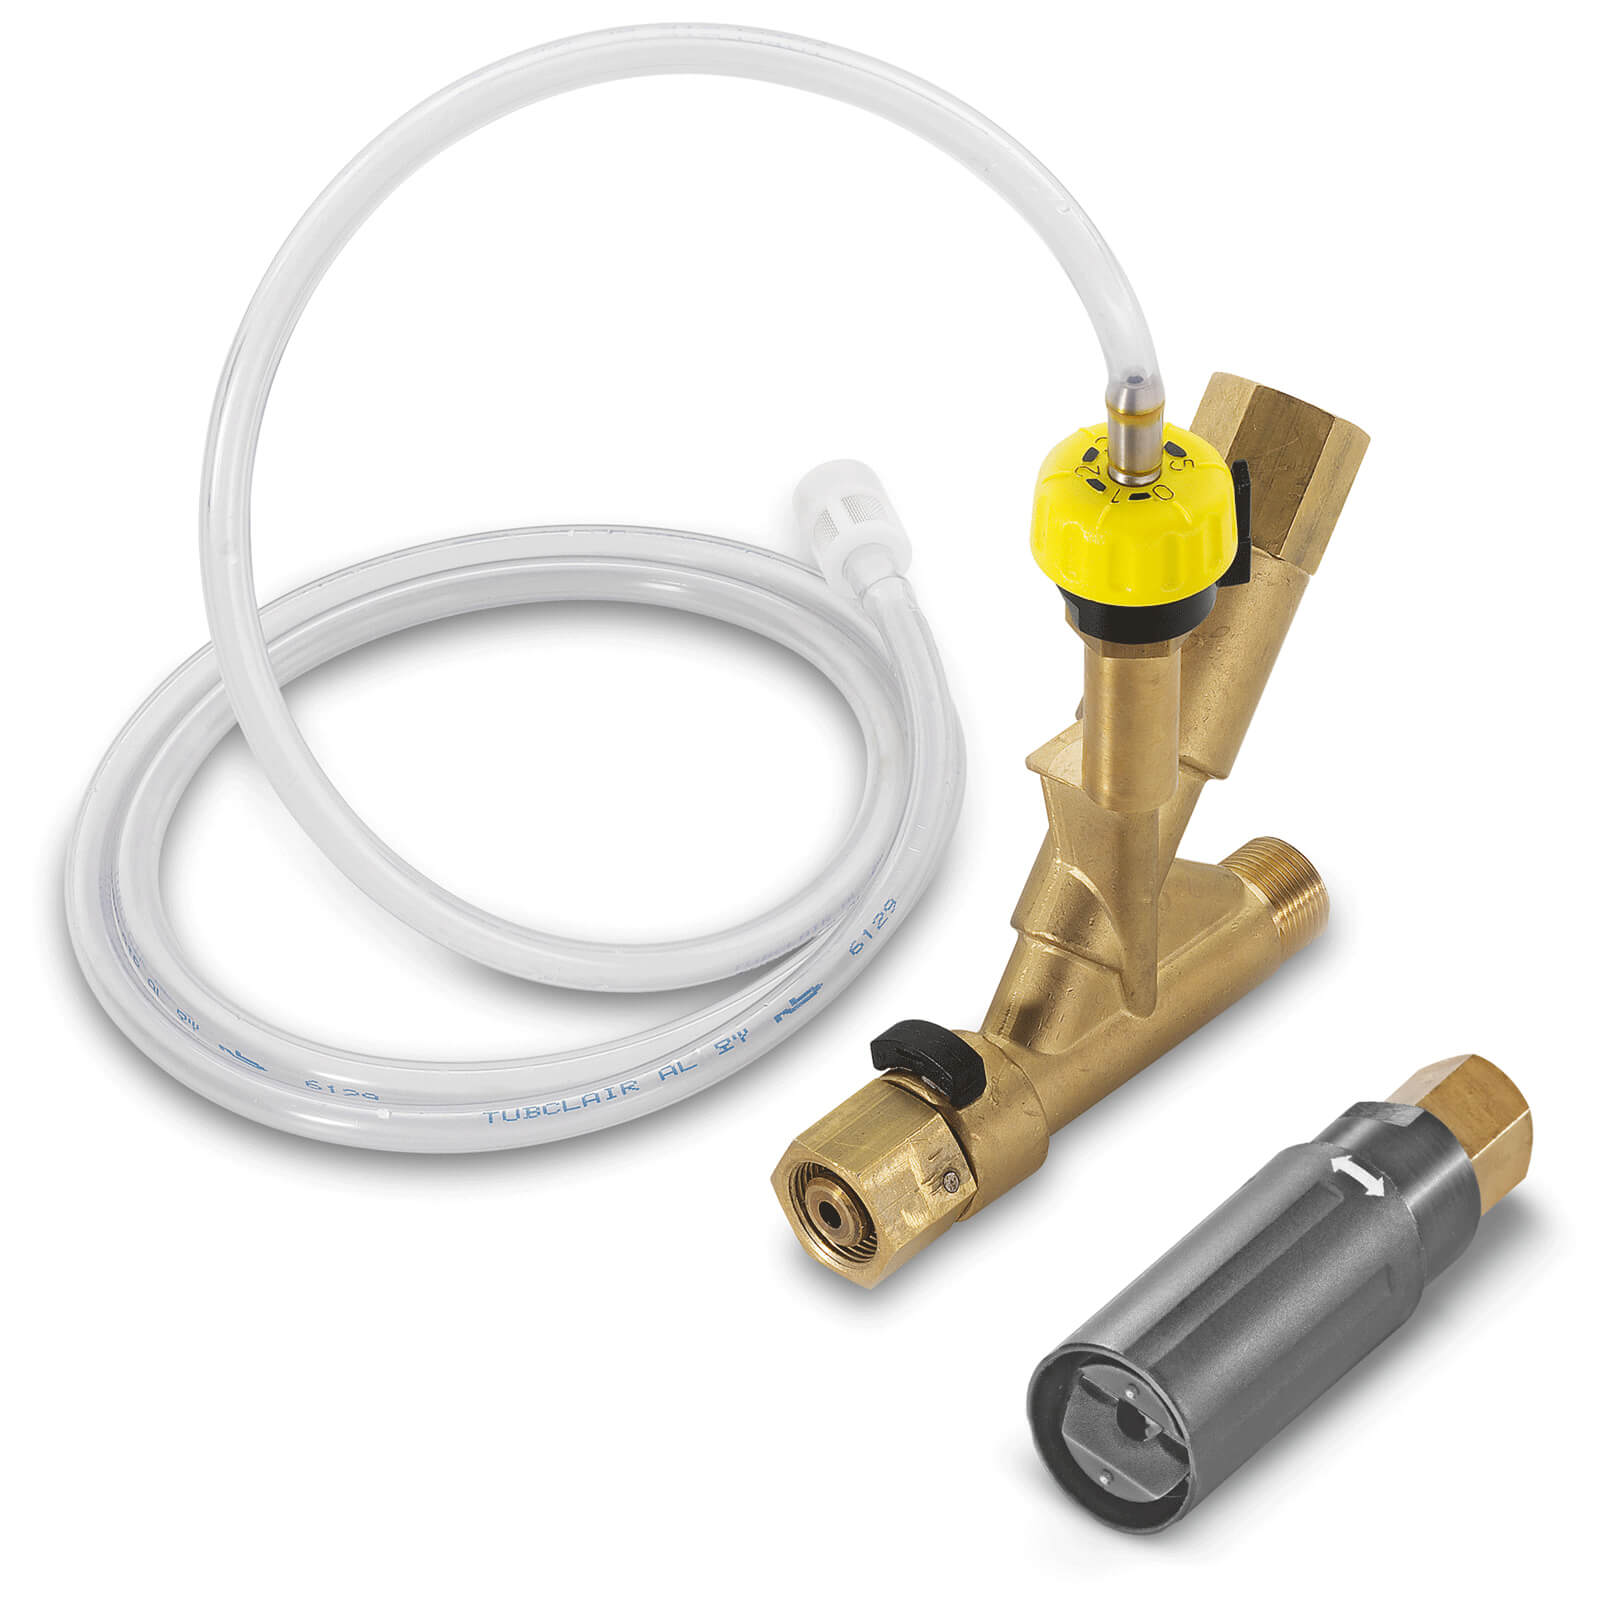 Karcher Easy Foam Kit with Detergent Injector for HD and XPERT Pressure Washers (Easy!Lock)